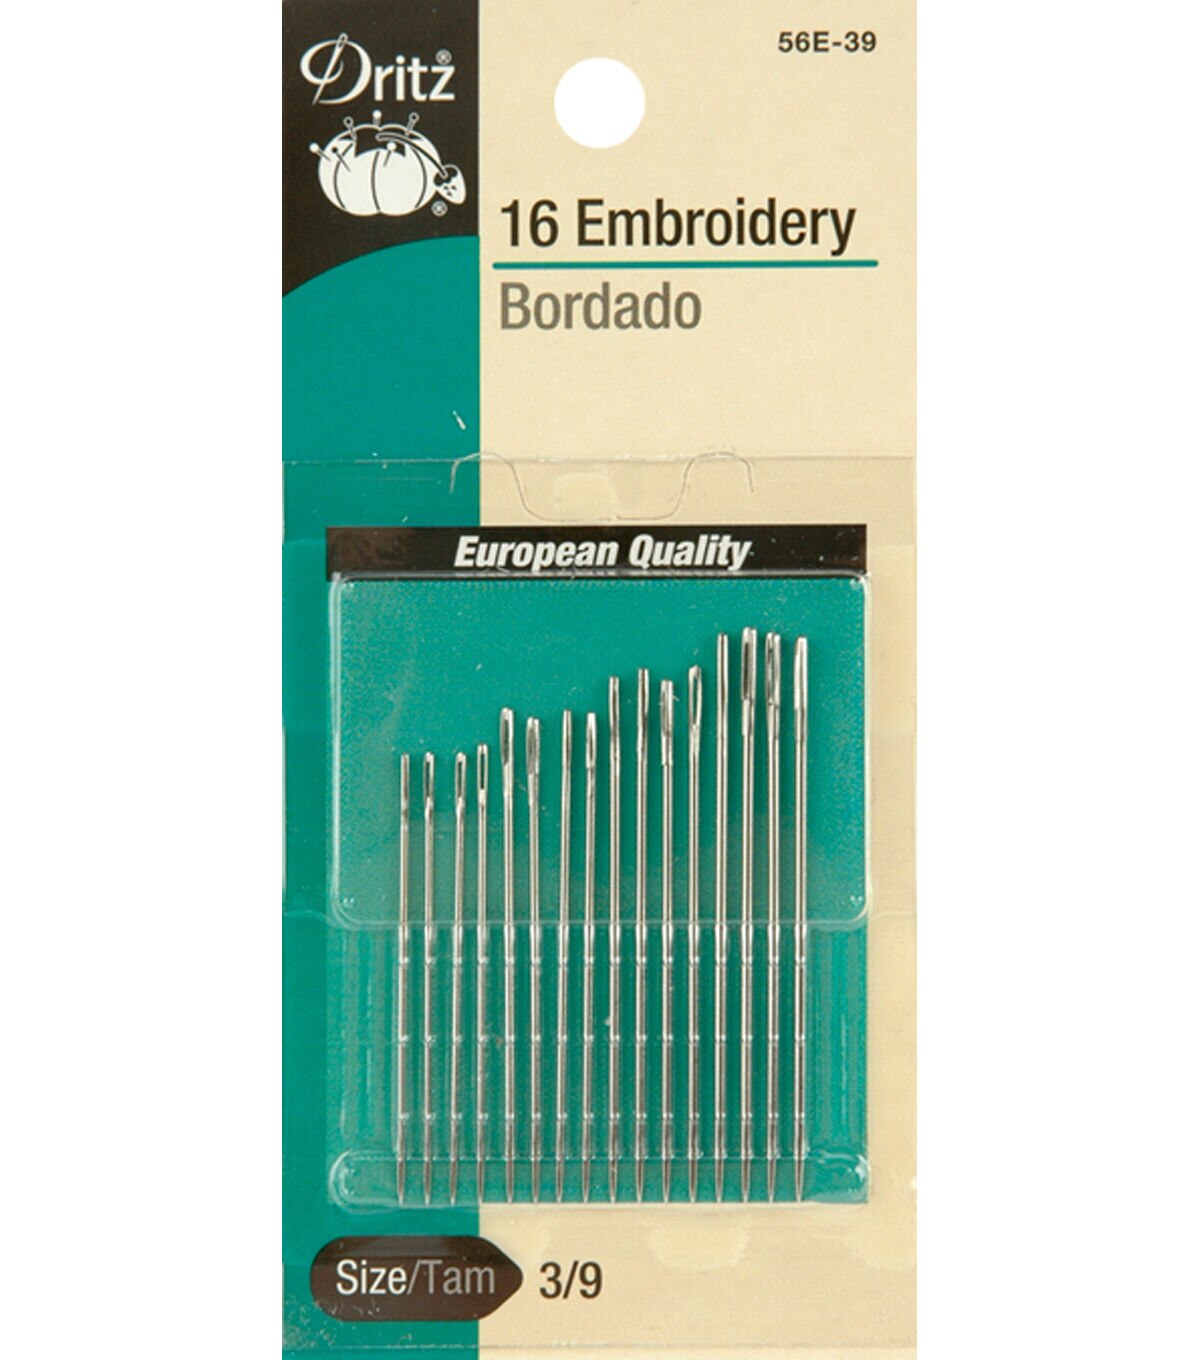 Embroiderymaterial Pony Darners Needles for Craft and Embroidery Purpose 1 Packet 25 Needles, Size7 